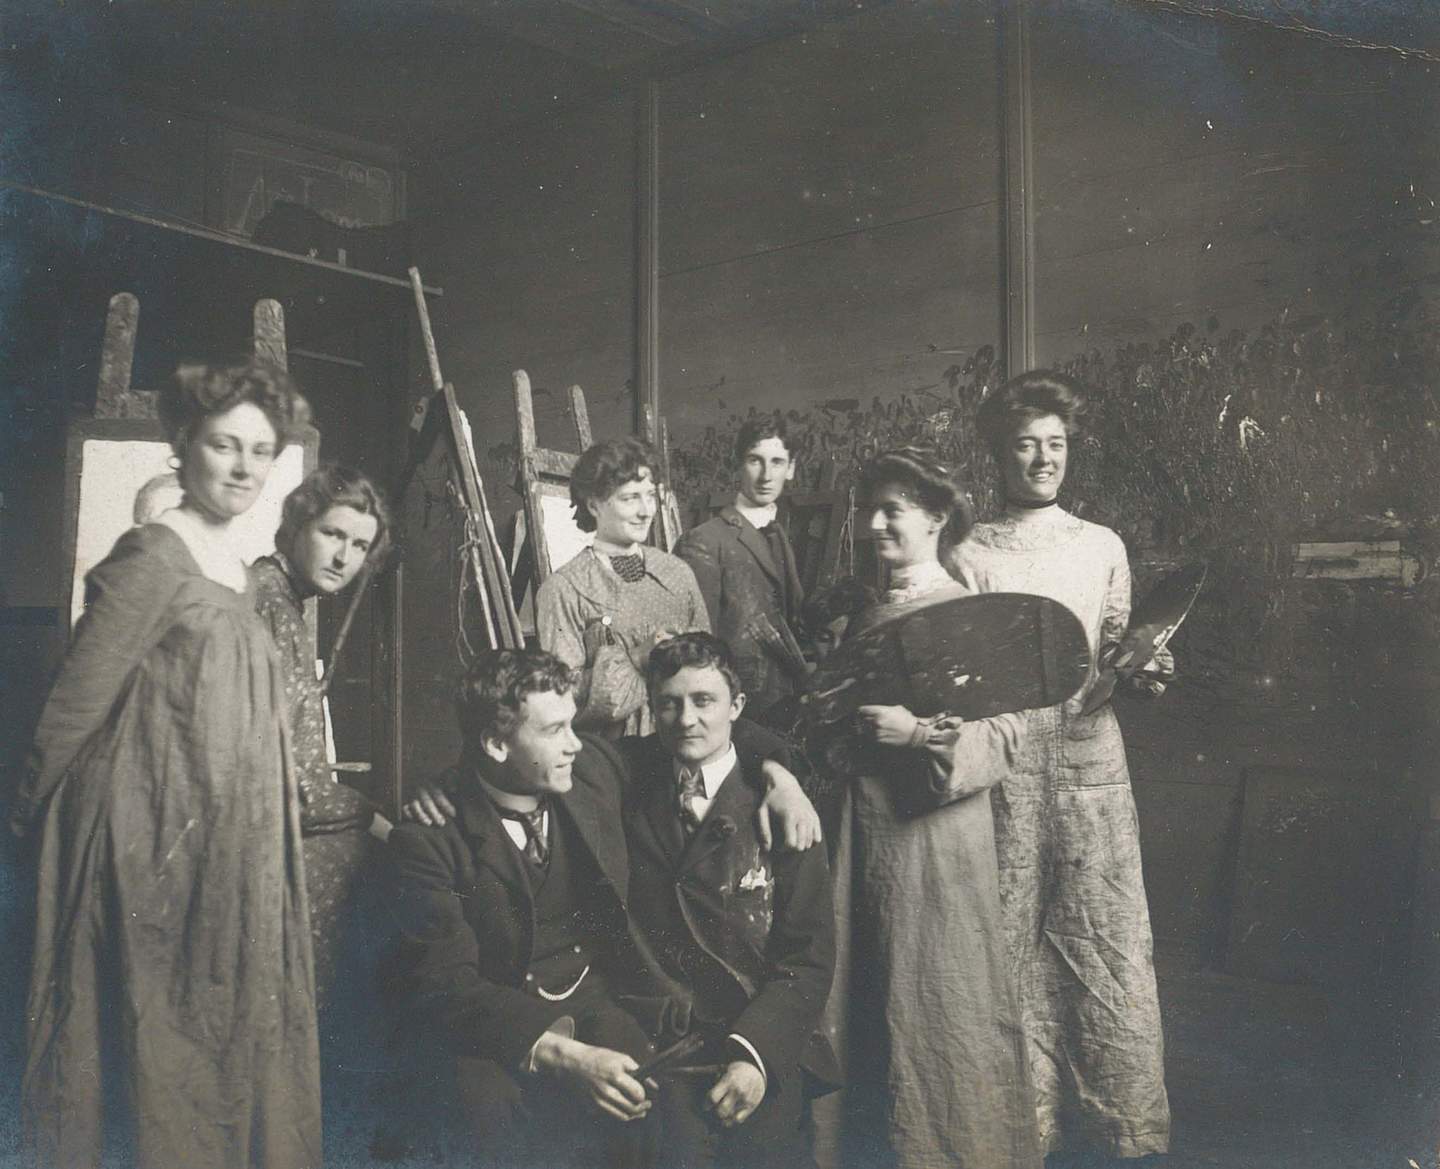 Black and white photograph of women and men student artists seated and standing, wearing art smocks, some holding painting palettes, with easels in the background.